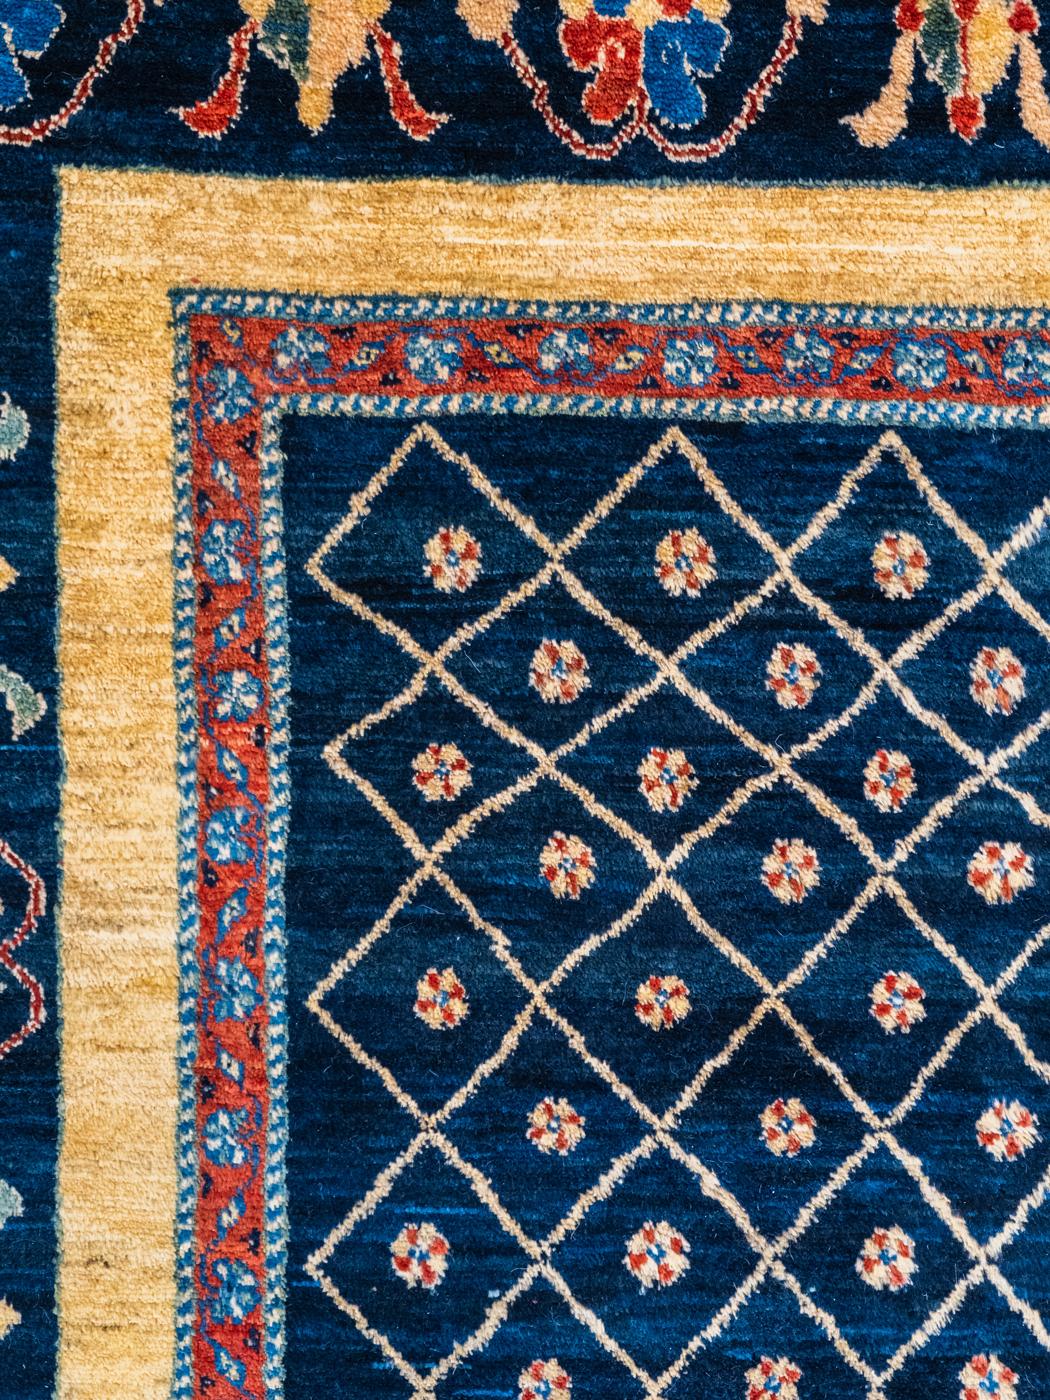 Gold and Indigo Persian Shekarloo Carpet, Wool, Hand-Knotted, 7' x 9' In New Condition For Sale In New York, NY